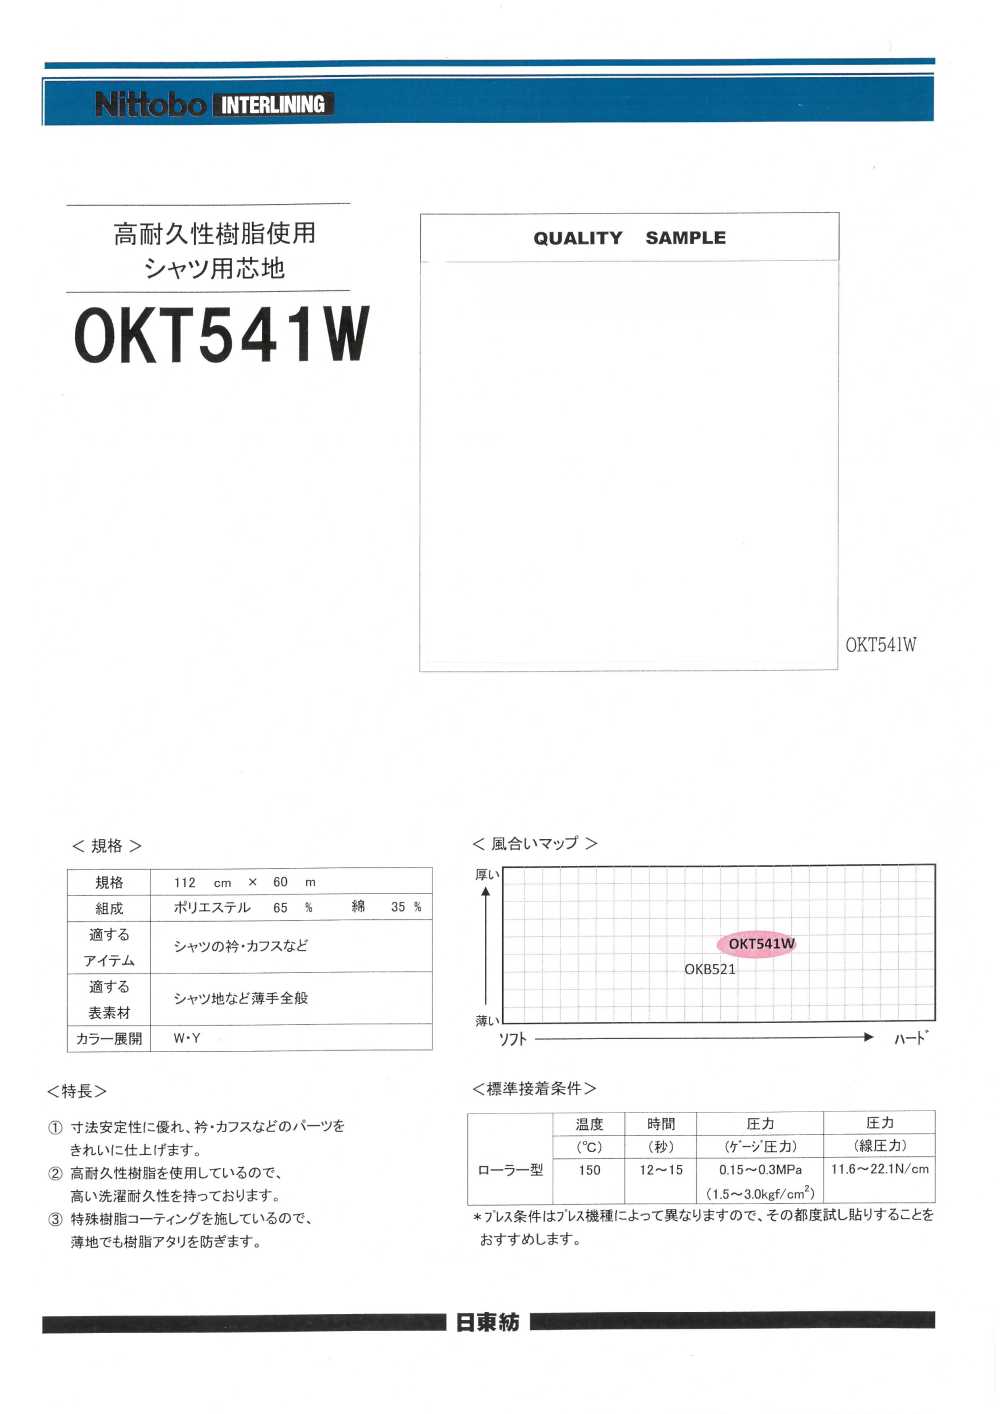 OKT541W Interlining Material For Shirts Made Of Highly Durable Resin Nittobo